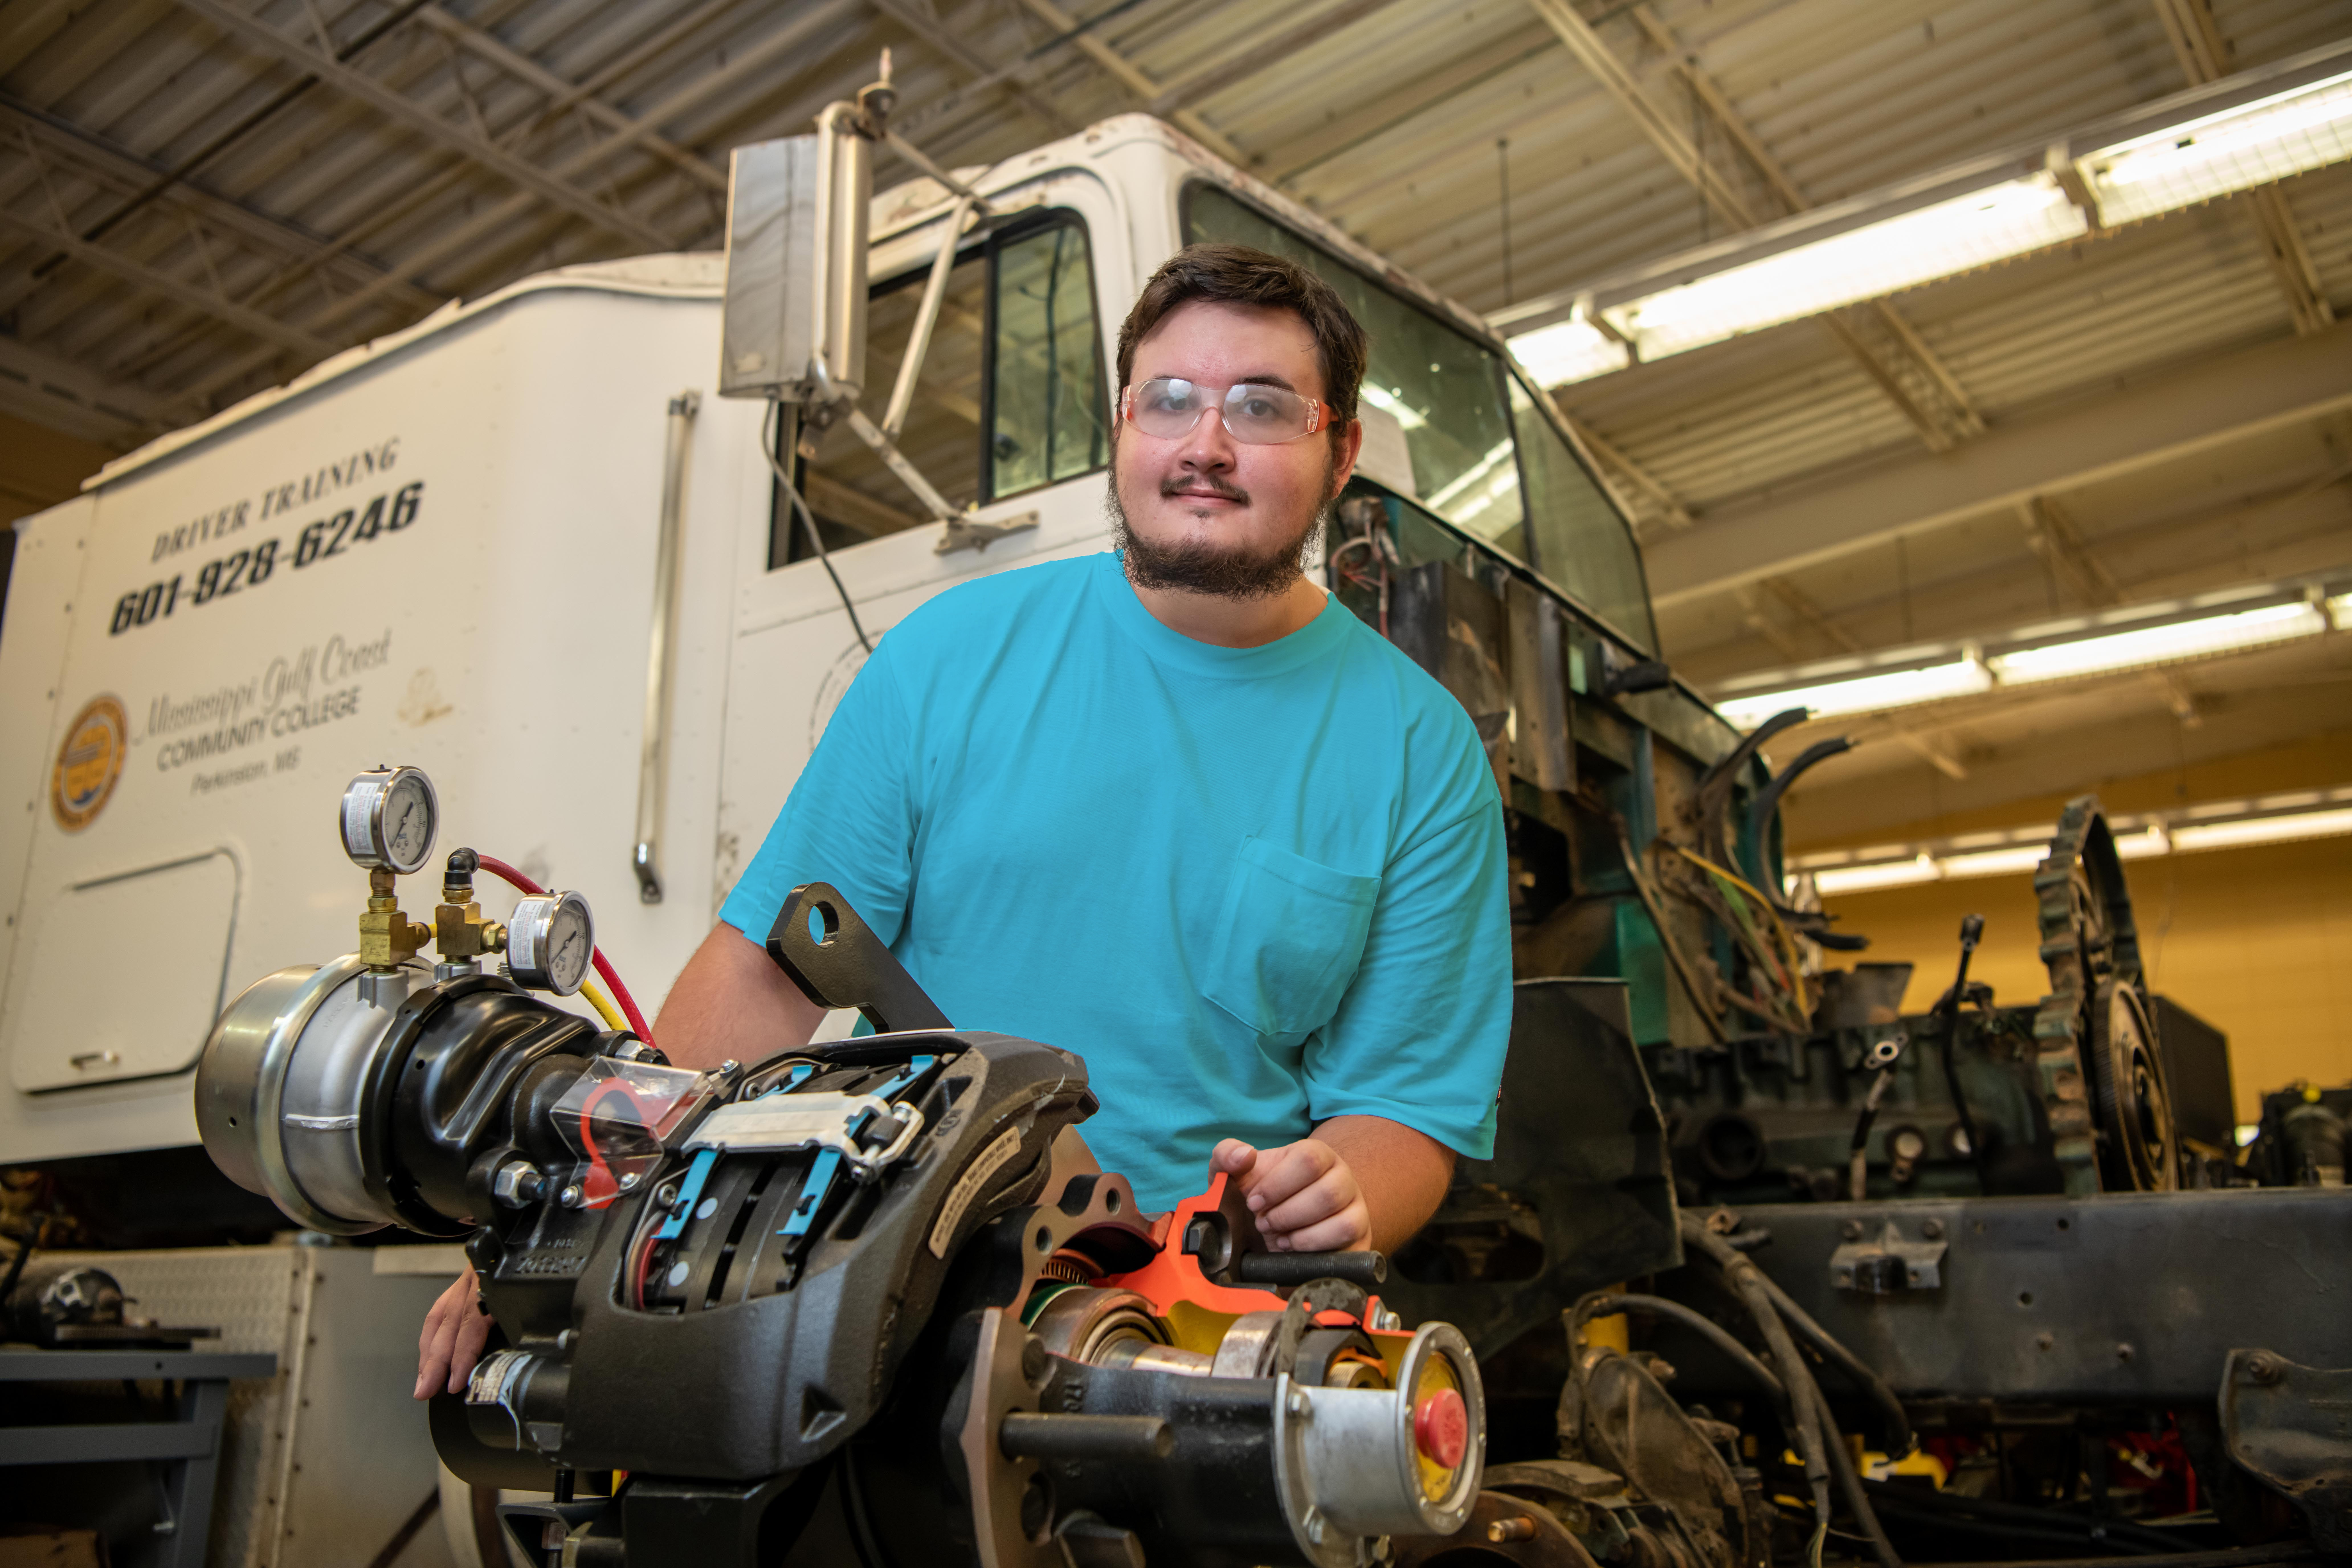 MGCCC offers Heavy Equipment Maintenance Technology program at no cost